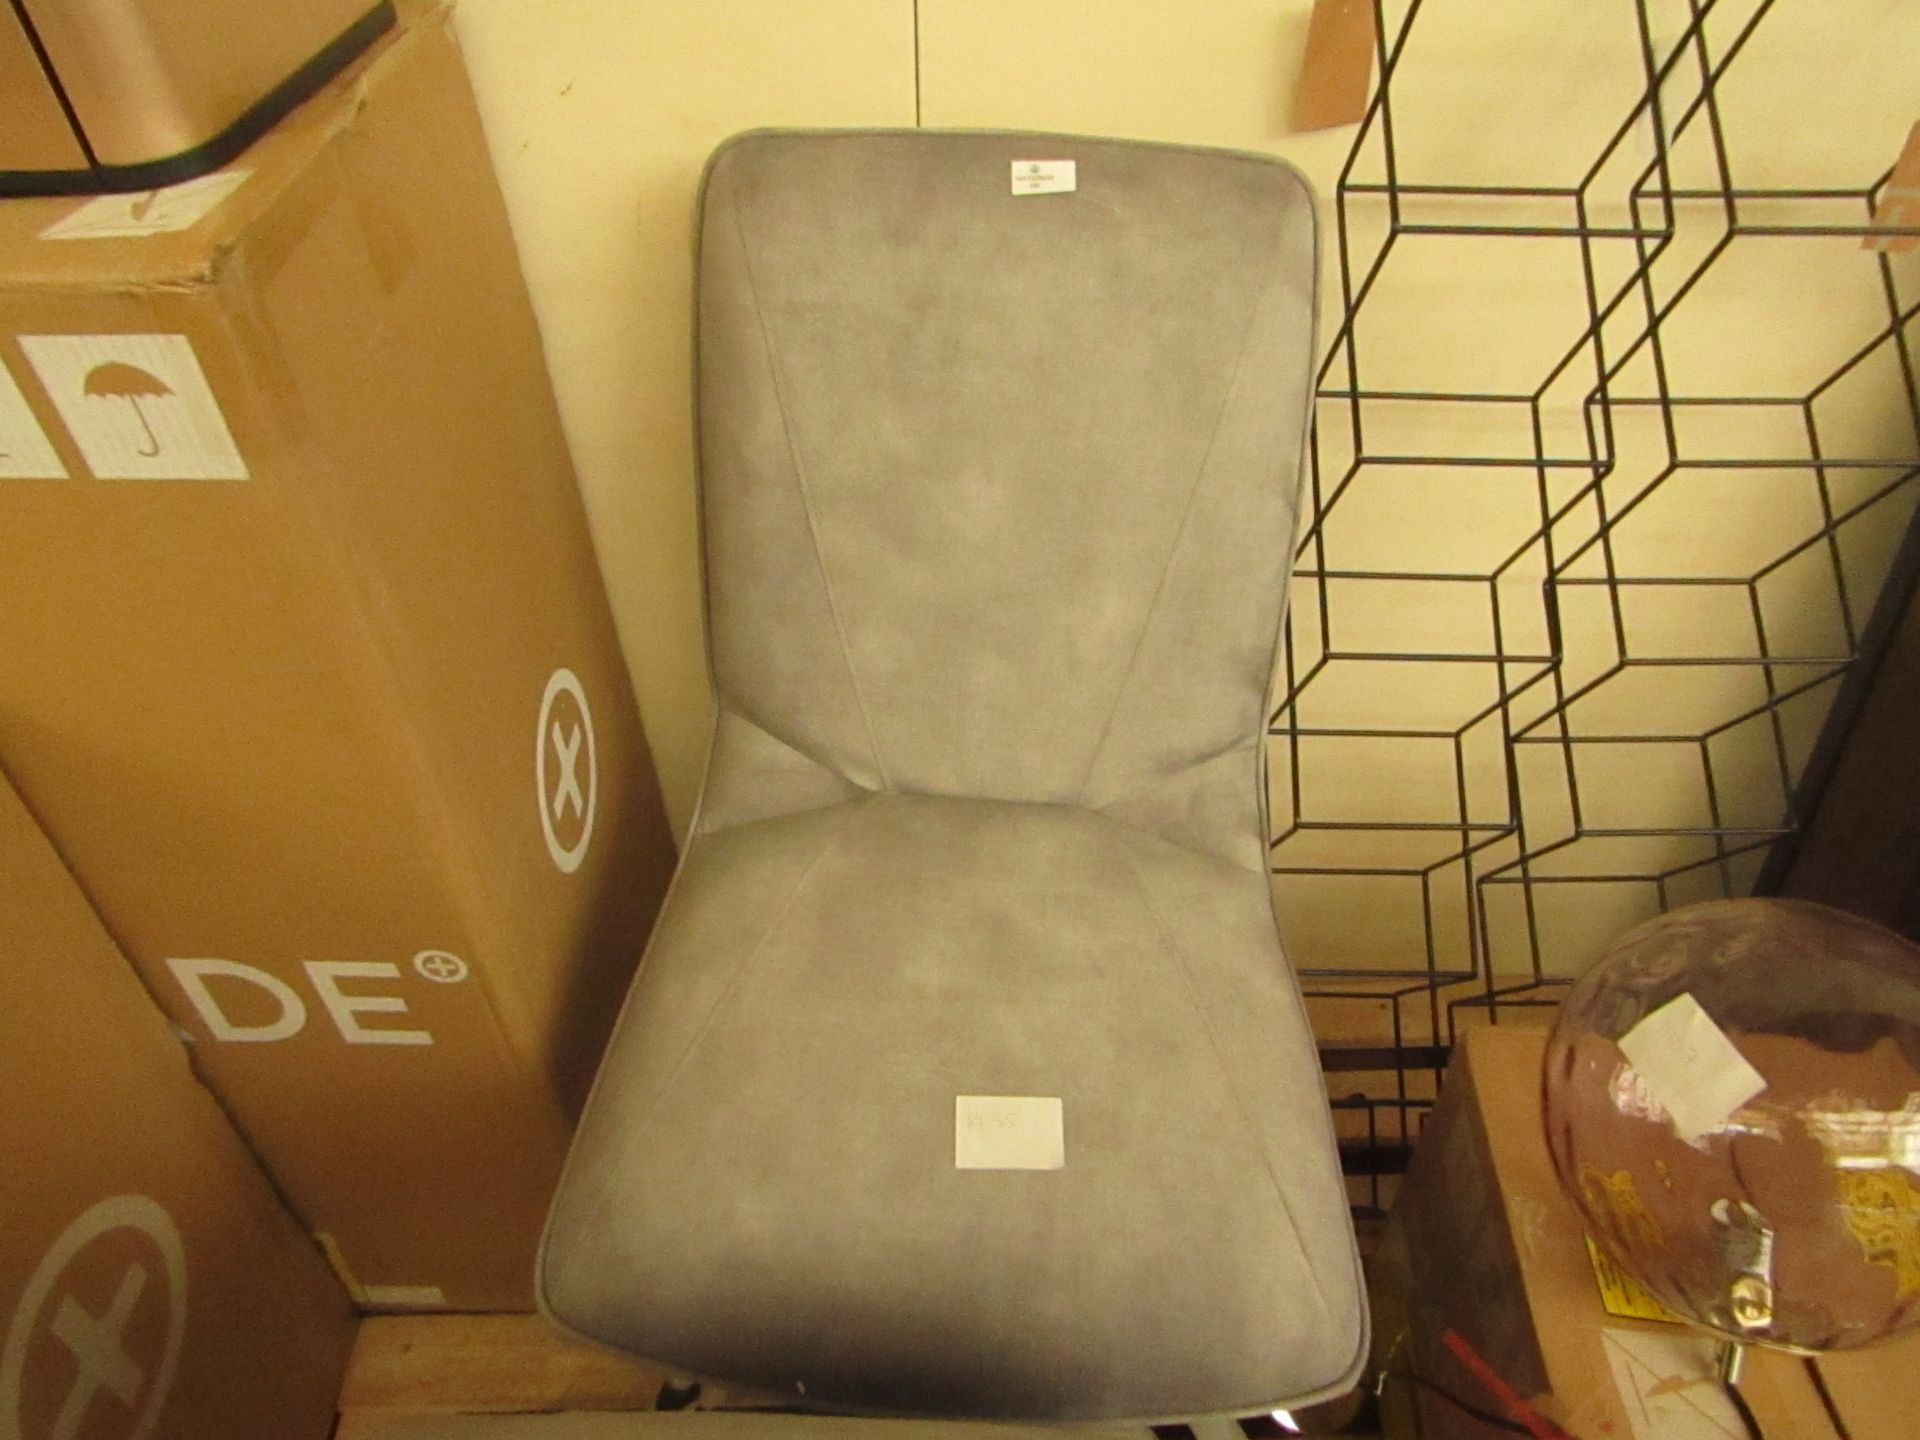 1 x Cox & Cox Provence Swivel Chair RRP £175.00 SKU COX-AP-1228755 TOTAL RRP £175 This lot is a